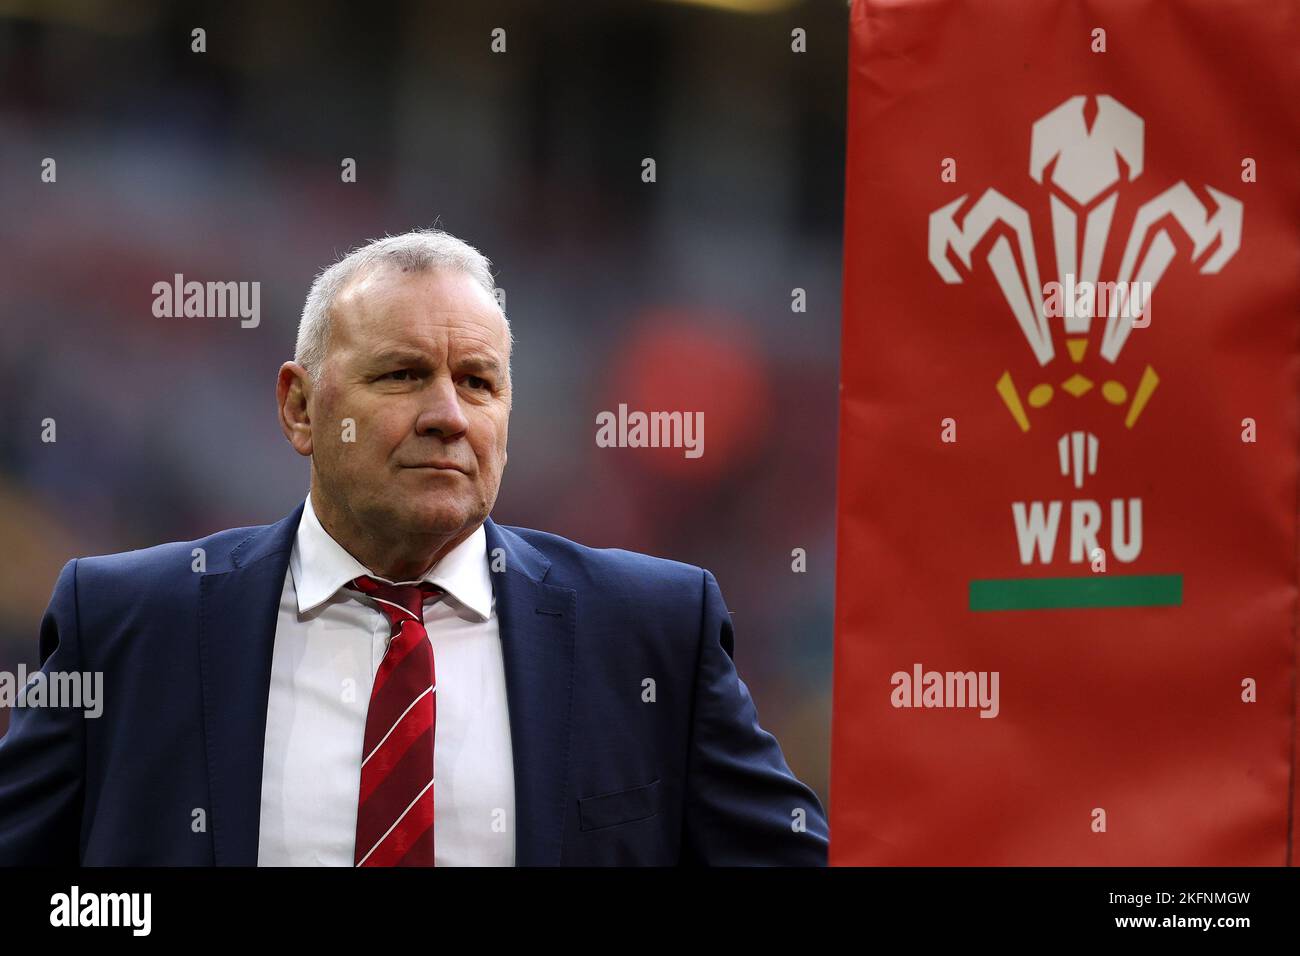 Cardiff, UK. 19th Nov, 2022. Wayne Pivac, the head coach of Wales rugby team looks on before the game. Autumn nations series 2022 rugby match, Wales v Georgia at the Principality Stadium in Cardiff on Saturday 19th November 2022. pic by Andrew Orchard/Andrew Orchard sports photography/Alamy Live News Credit: Andrew Orchard sports photography/Alamy Live News Stock Photo